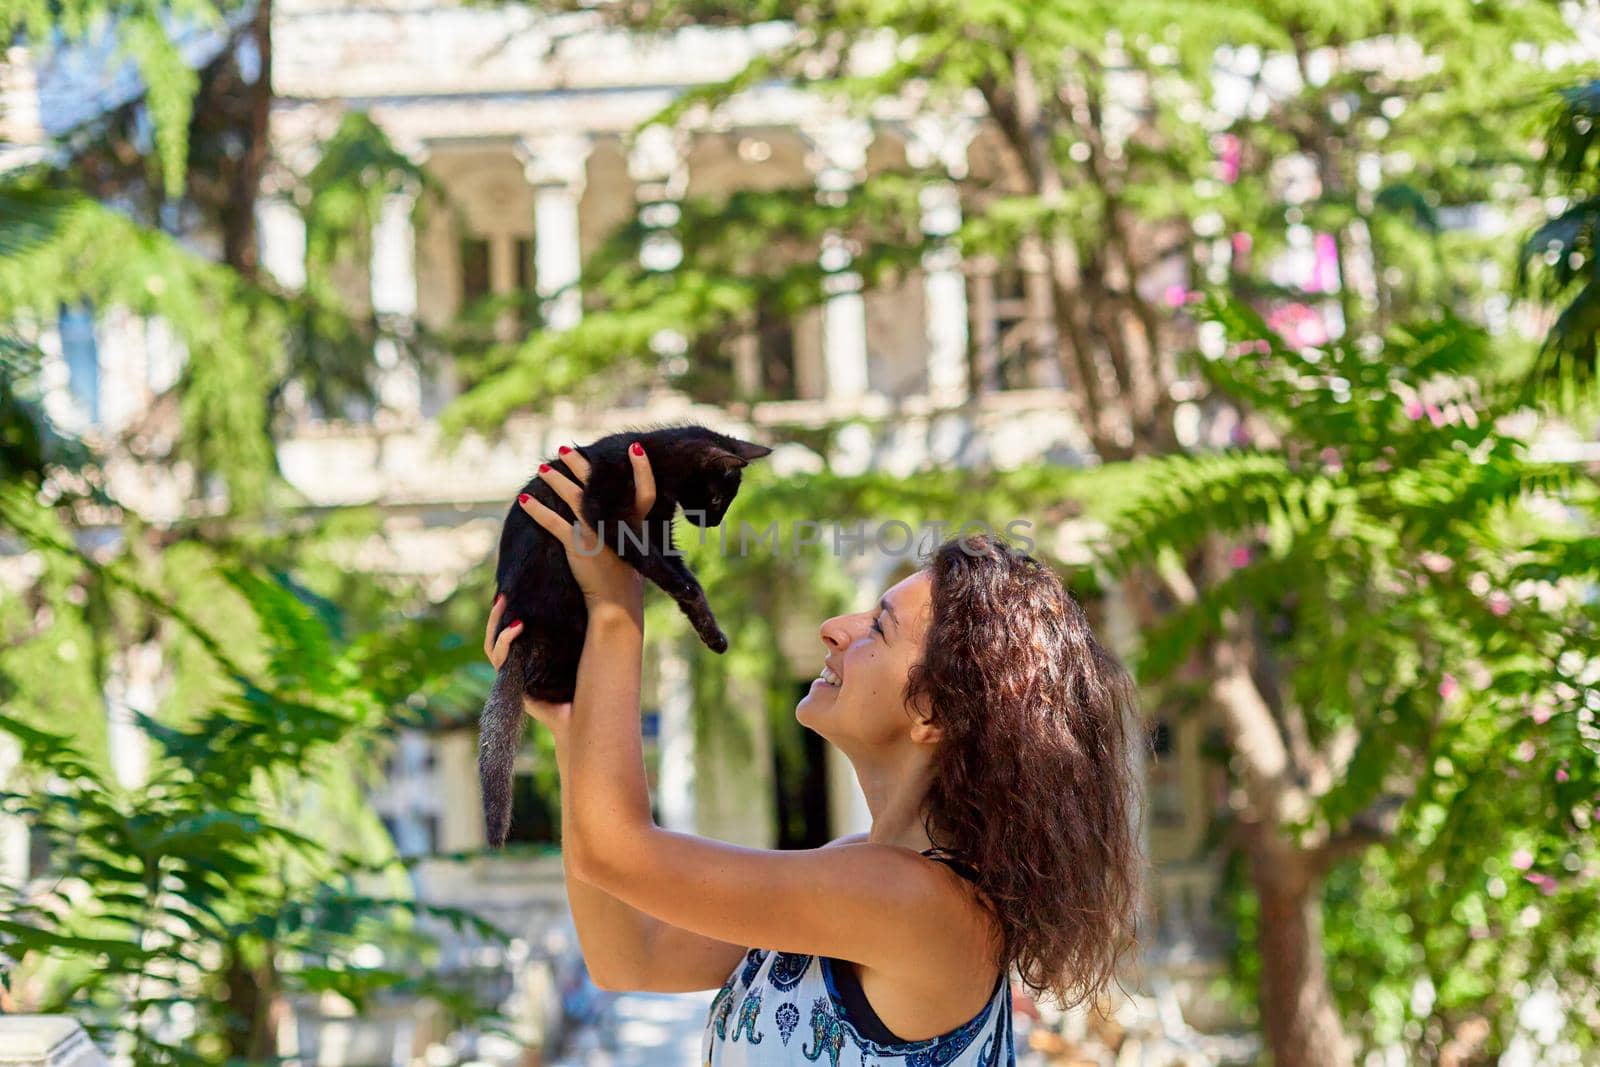 A young girl plays with a black kitten she found on the street.